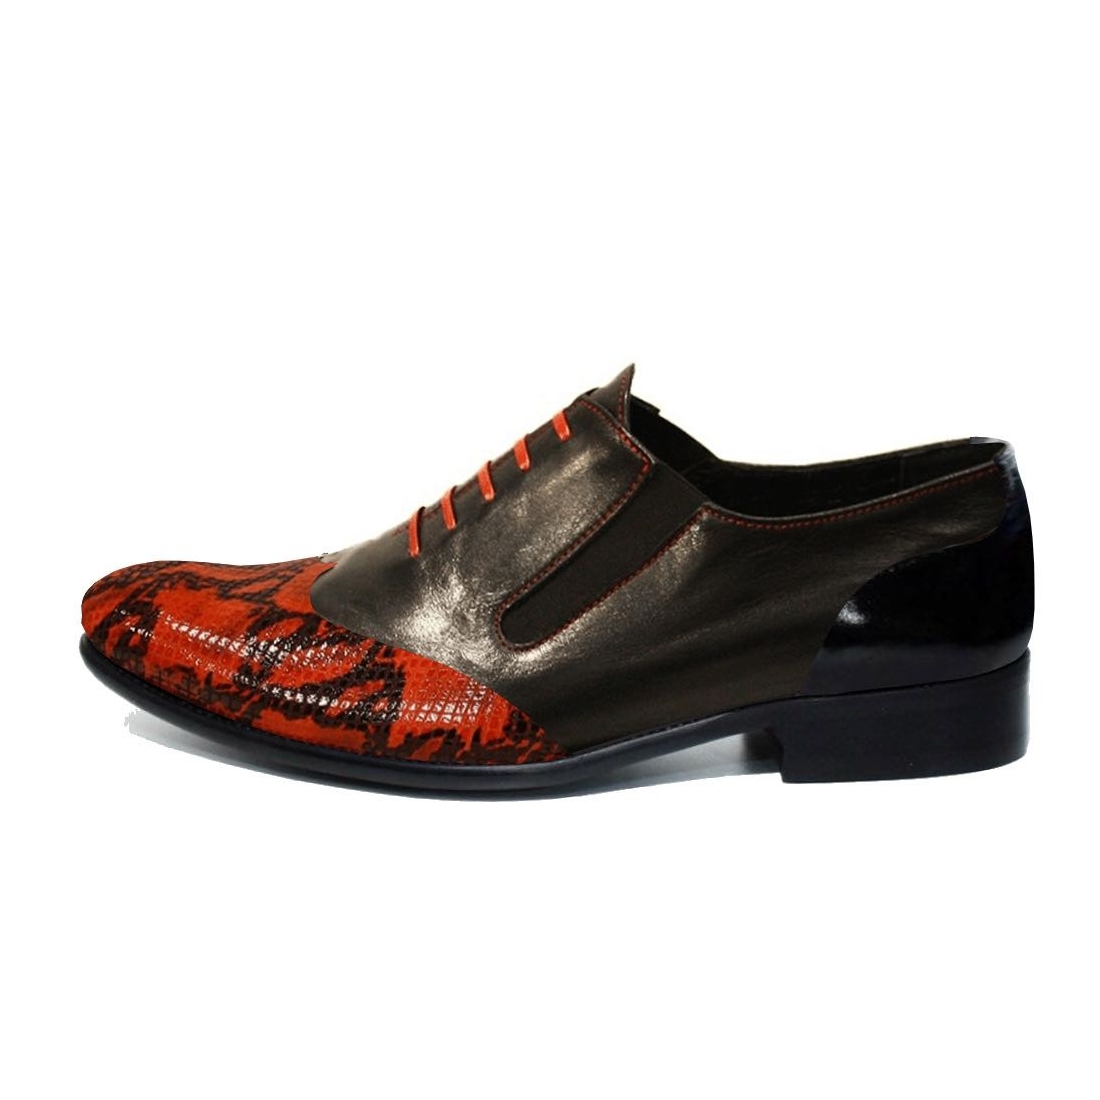 Modello Leterro - Loafers & Slip-Ons - Handmade Colorful Italian Leather Shoes